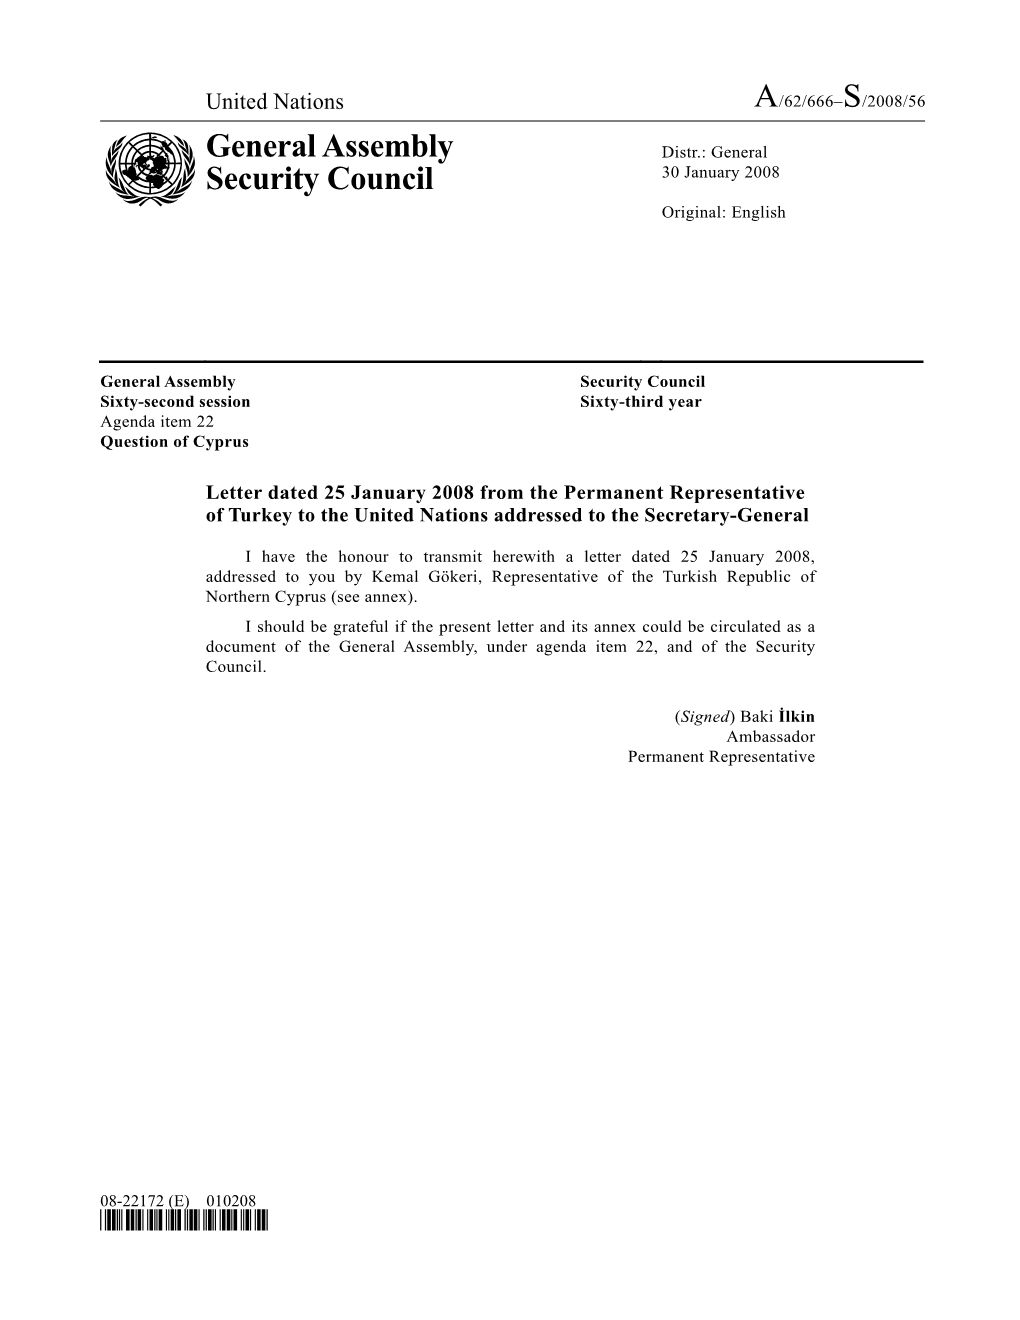 A/62/666–S/2008/56 General Assembly Security Council